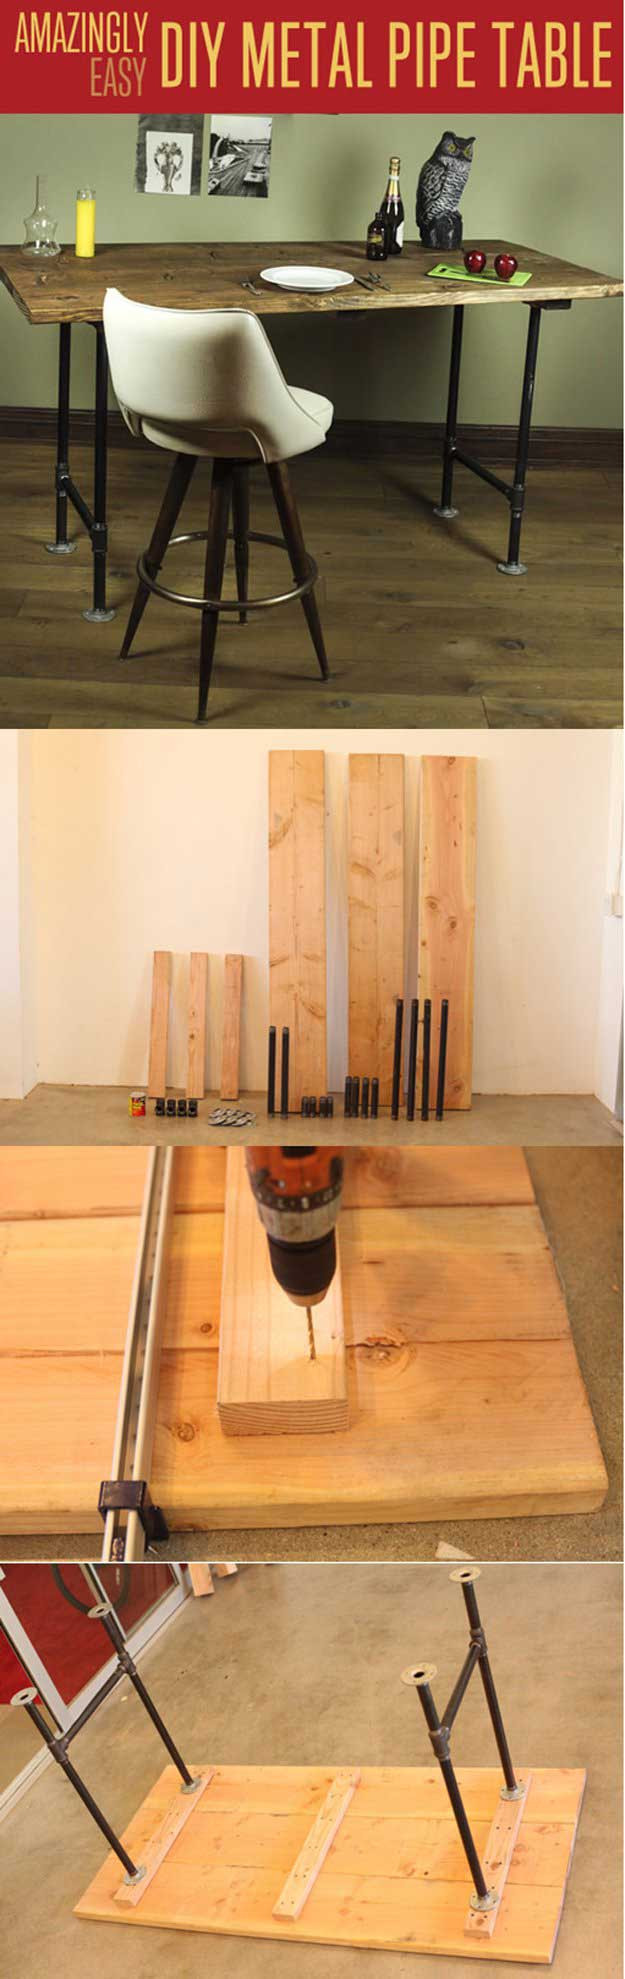 Easy DIY Woodworking Projects
 Easy Woodworking Projects DIY Projects Do It Yourself